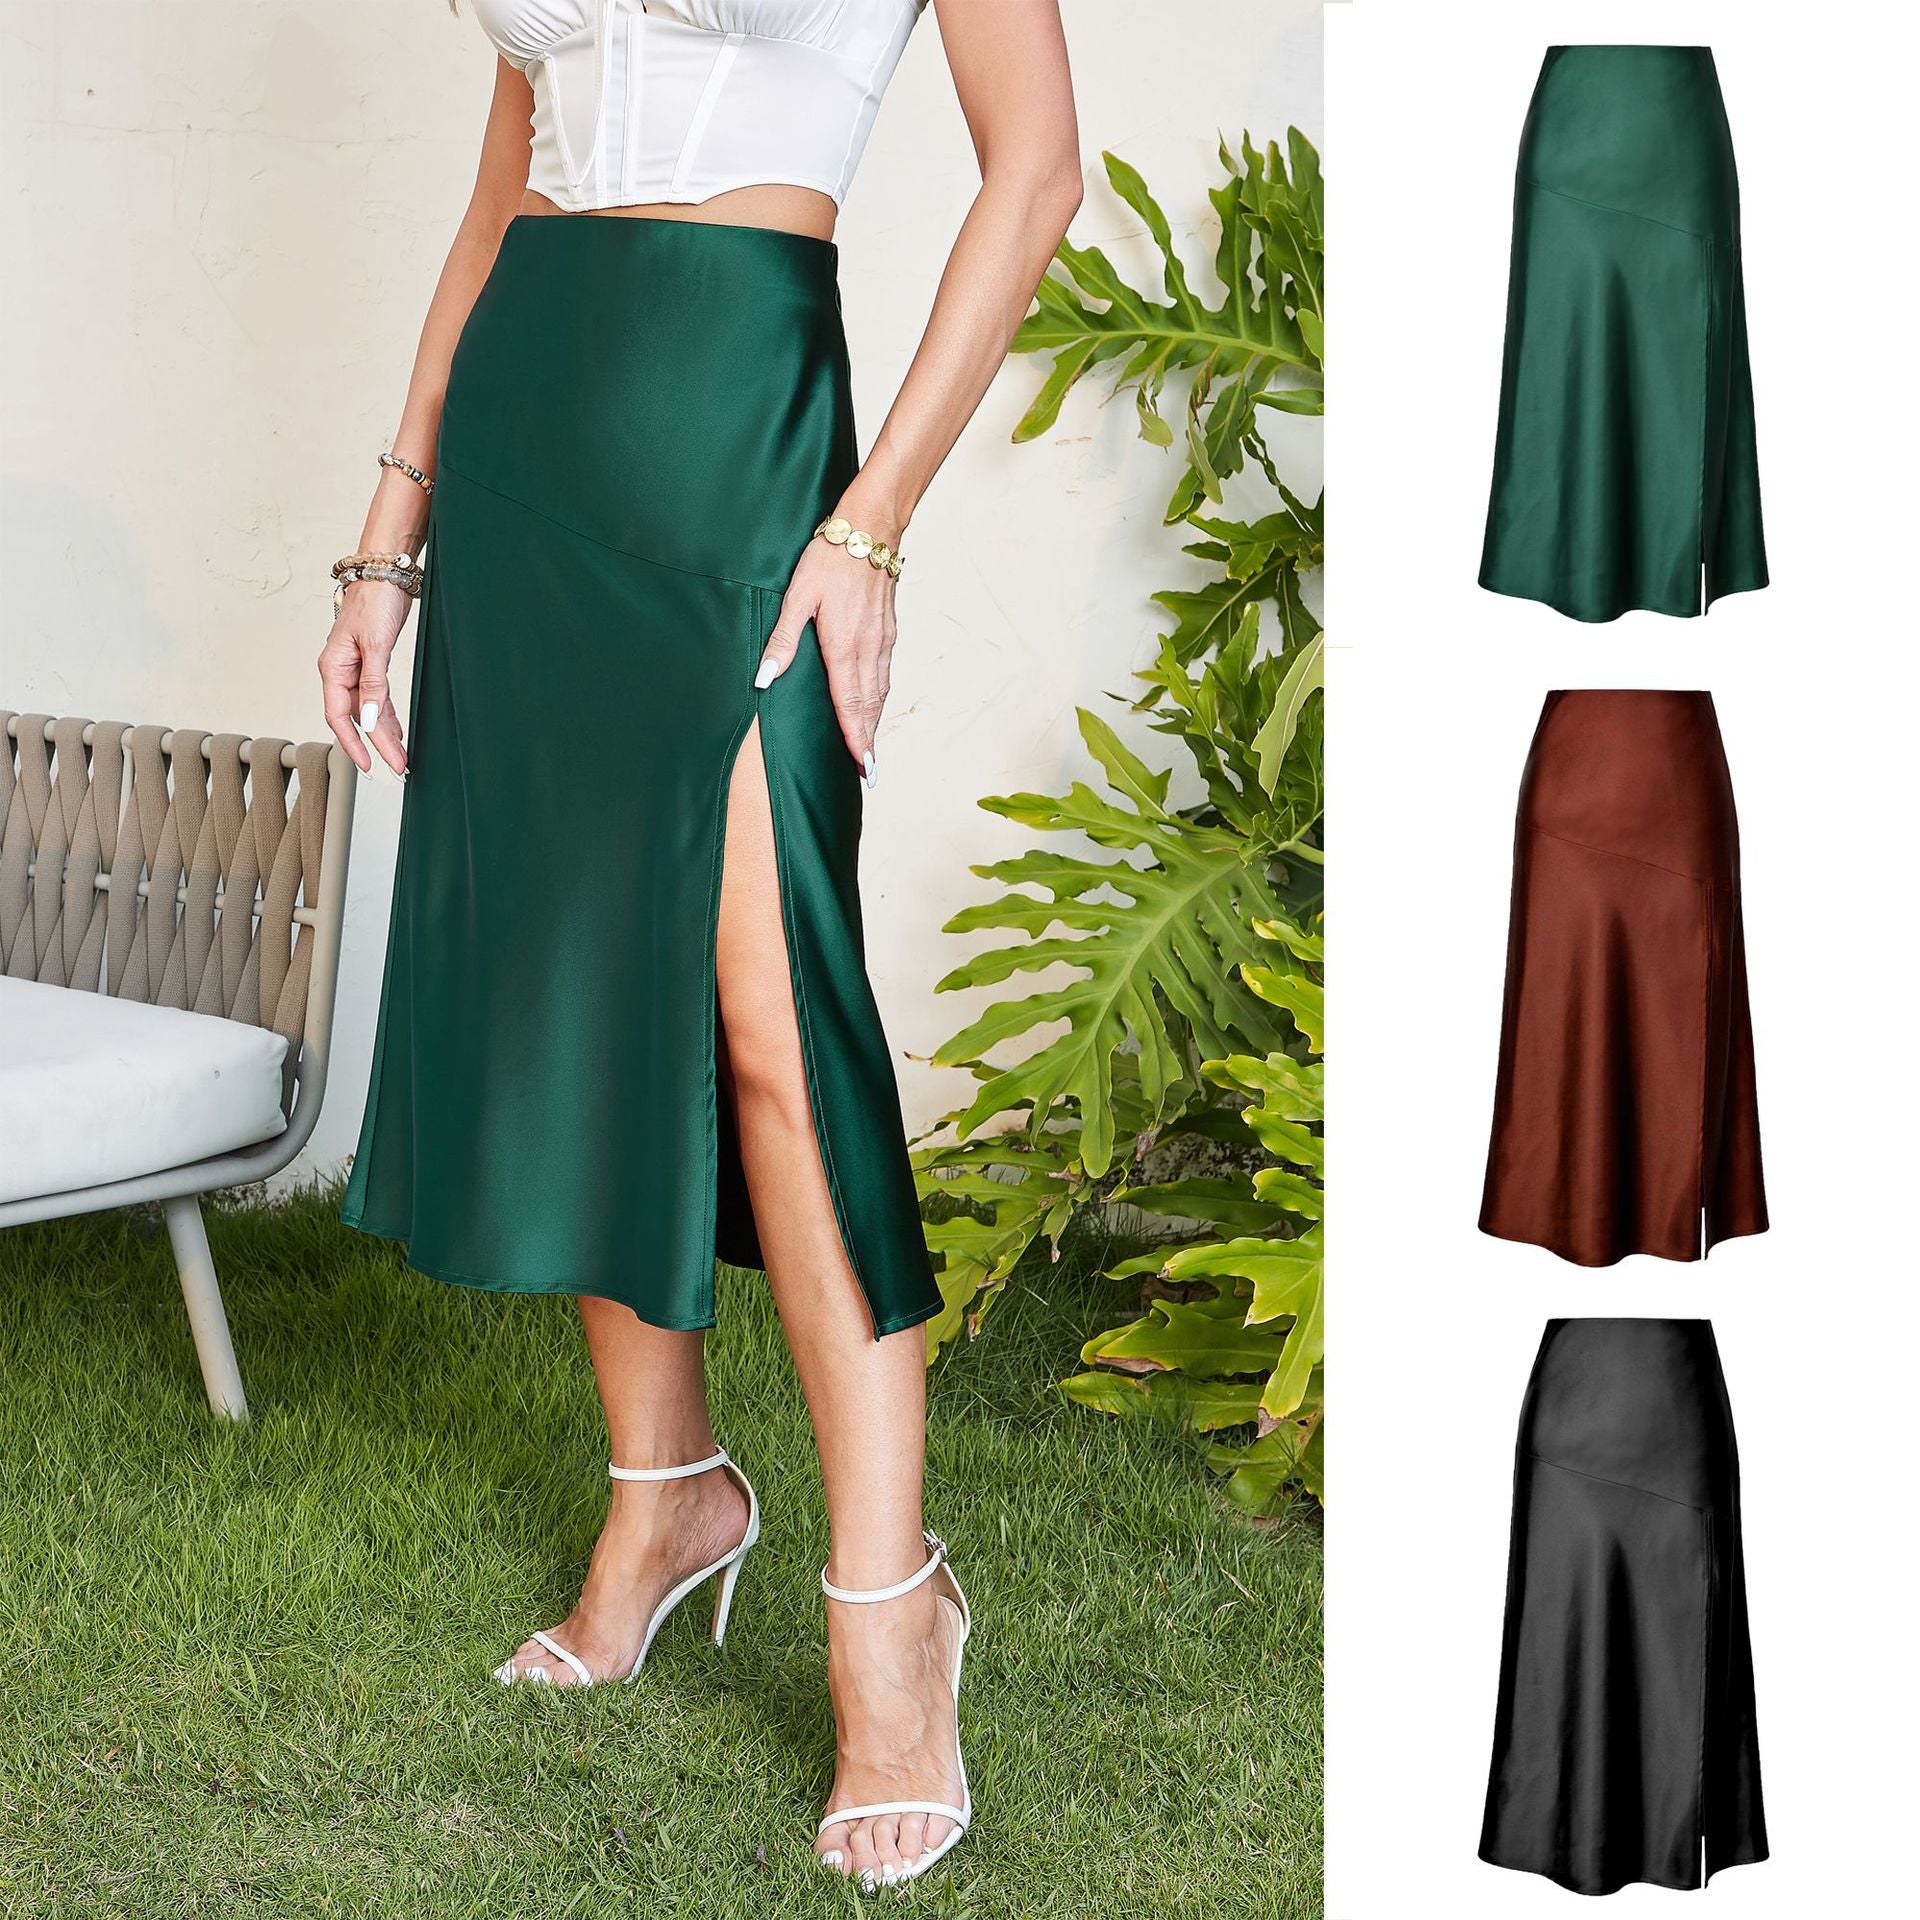 Women's Glossy Satin High-end Silky Pure Color Skirts